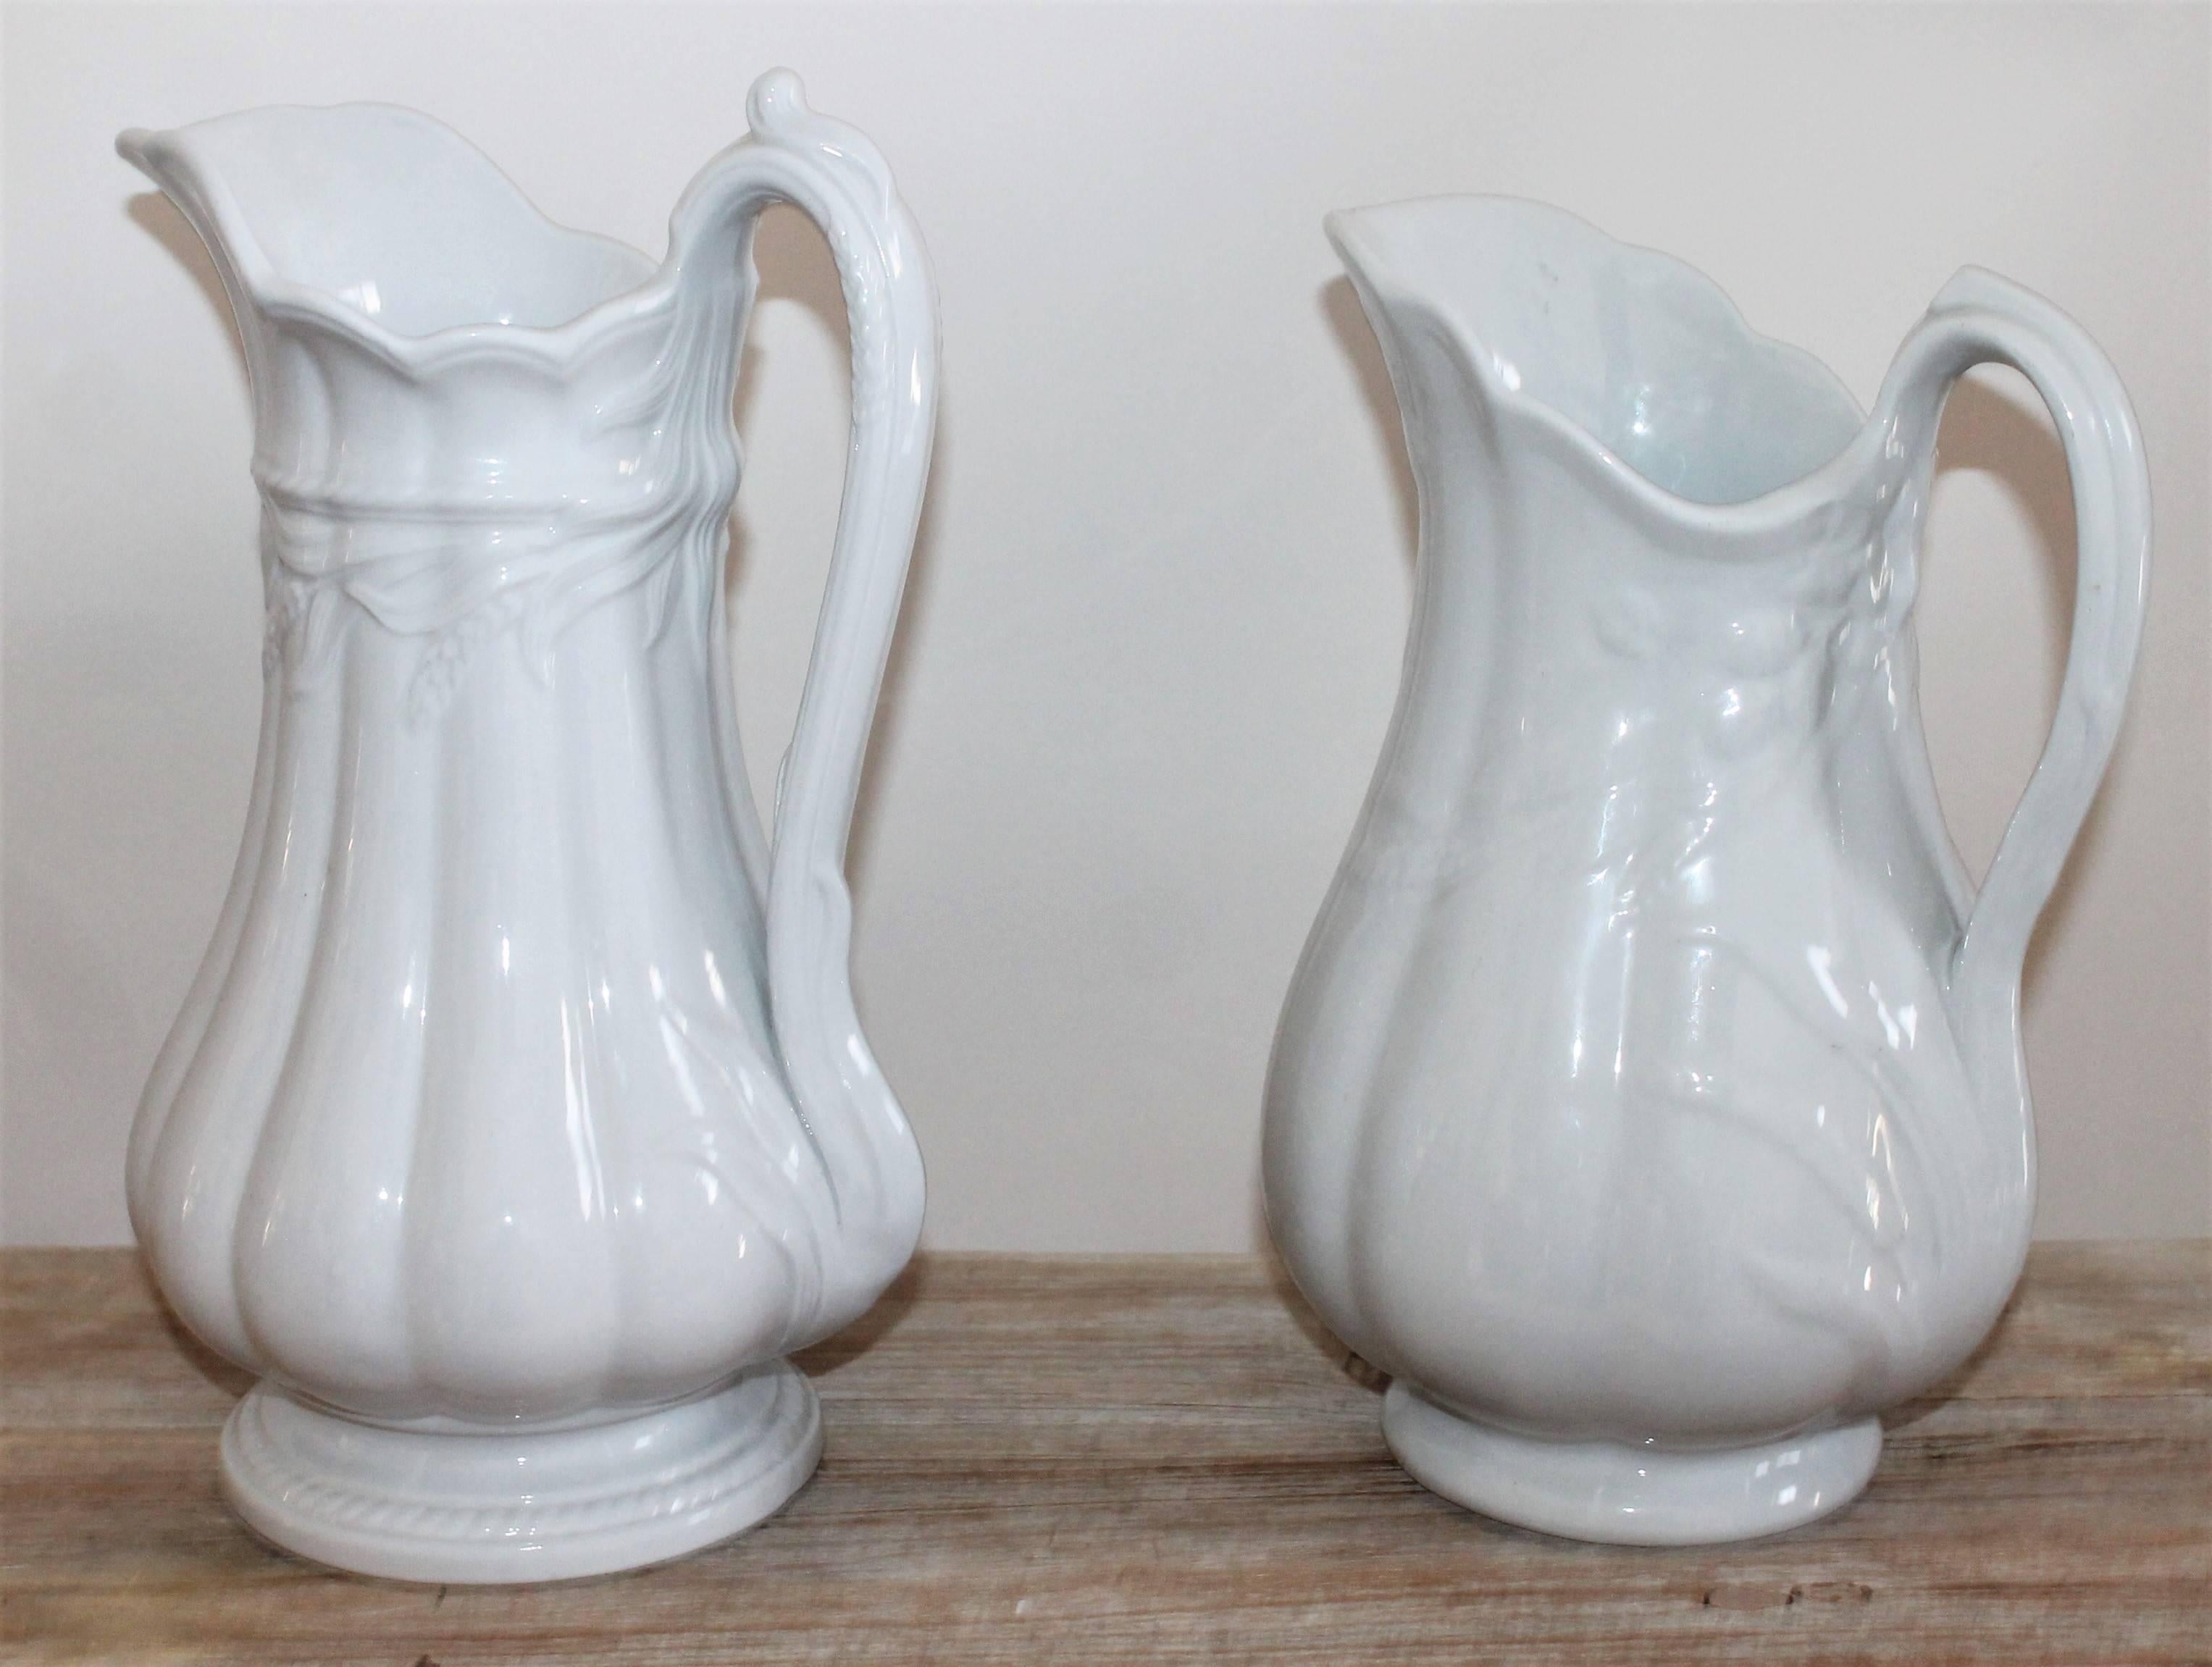 These two wheat pattern ironstone water pitchers are in fantastic pristine condition. Both are slightly different patterns.

Small pitcher measures: 8 x 11 x 6.5
Large pitcher measures: 8 x 12 x 7.